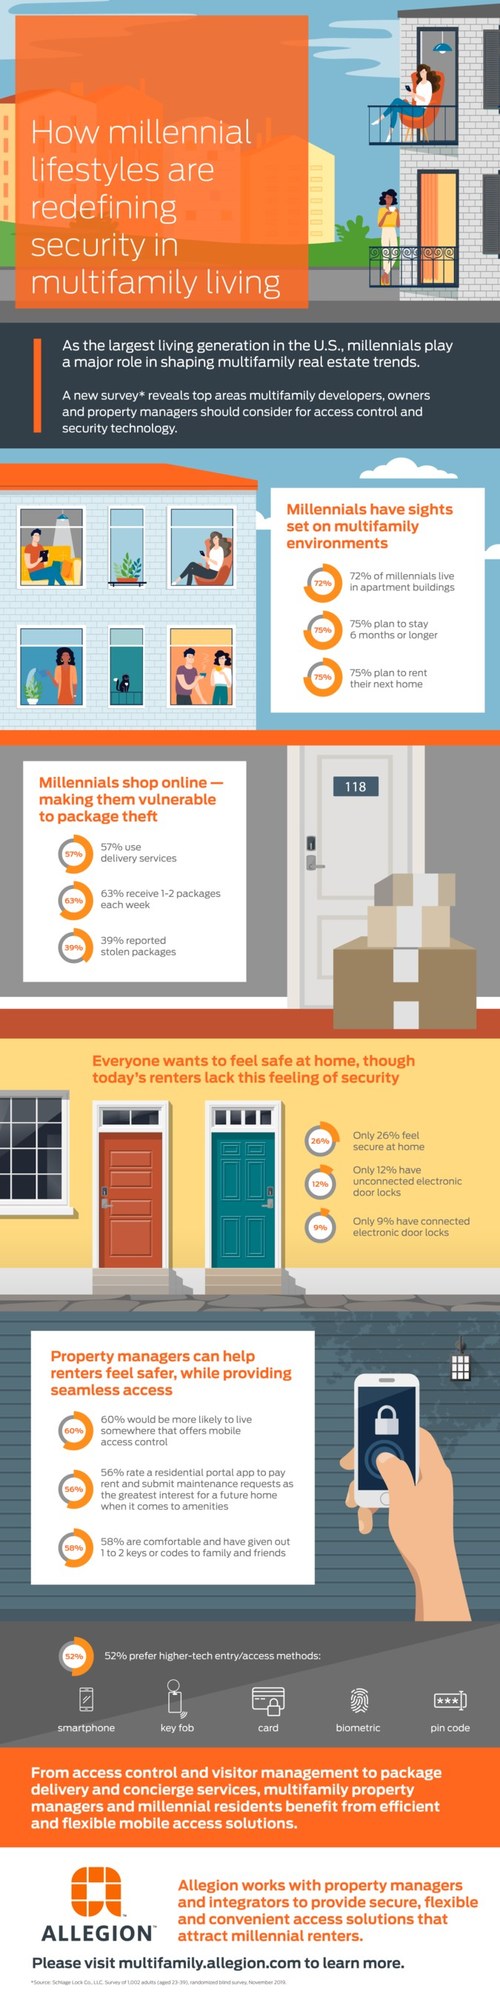 Home Safe Home: How Millennial Preferences Are Redefining Multifamily Living